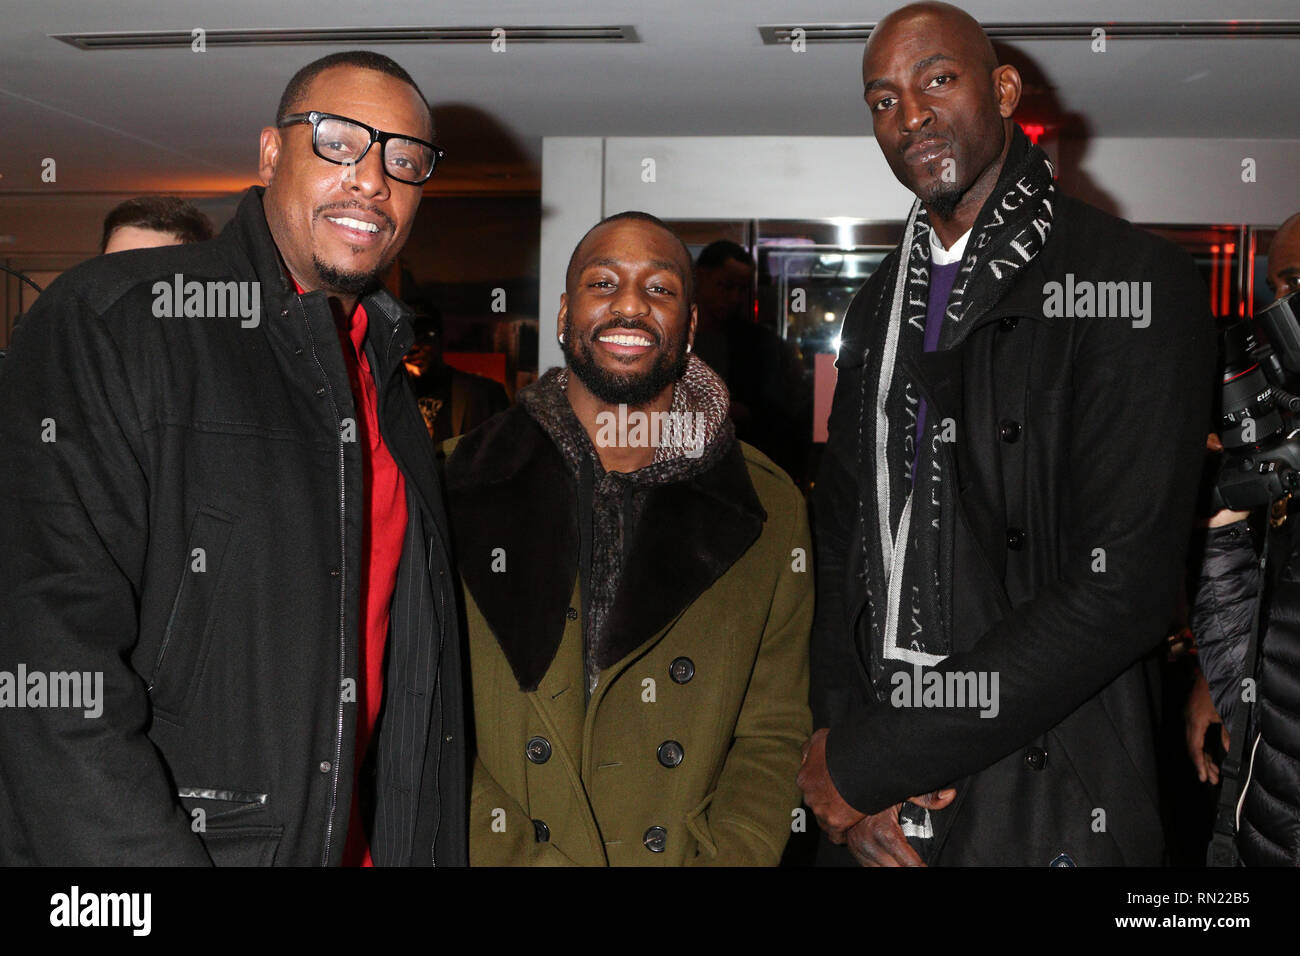 Charlotte, NC, USA. 15th Feb, 2019. Paul Pierce and Kevin Garnett at the Kenny 'The Jet' Smith 2019 NBA All-Star Bash at the NASCAR Hall Of Fame in Charlotte, North Carolina on February 15, 2019. Credit: Walik Goshorn/Media Punch/Alamy Live News Stock Photo